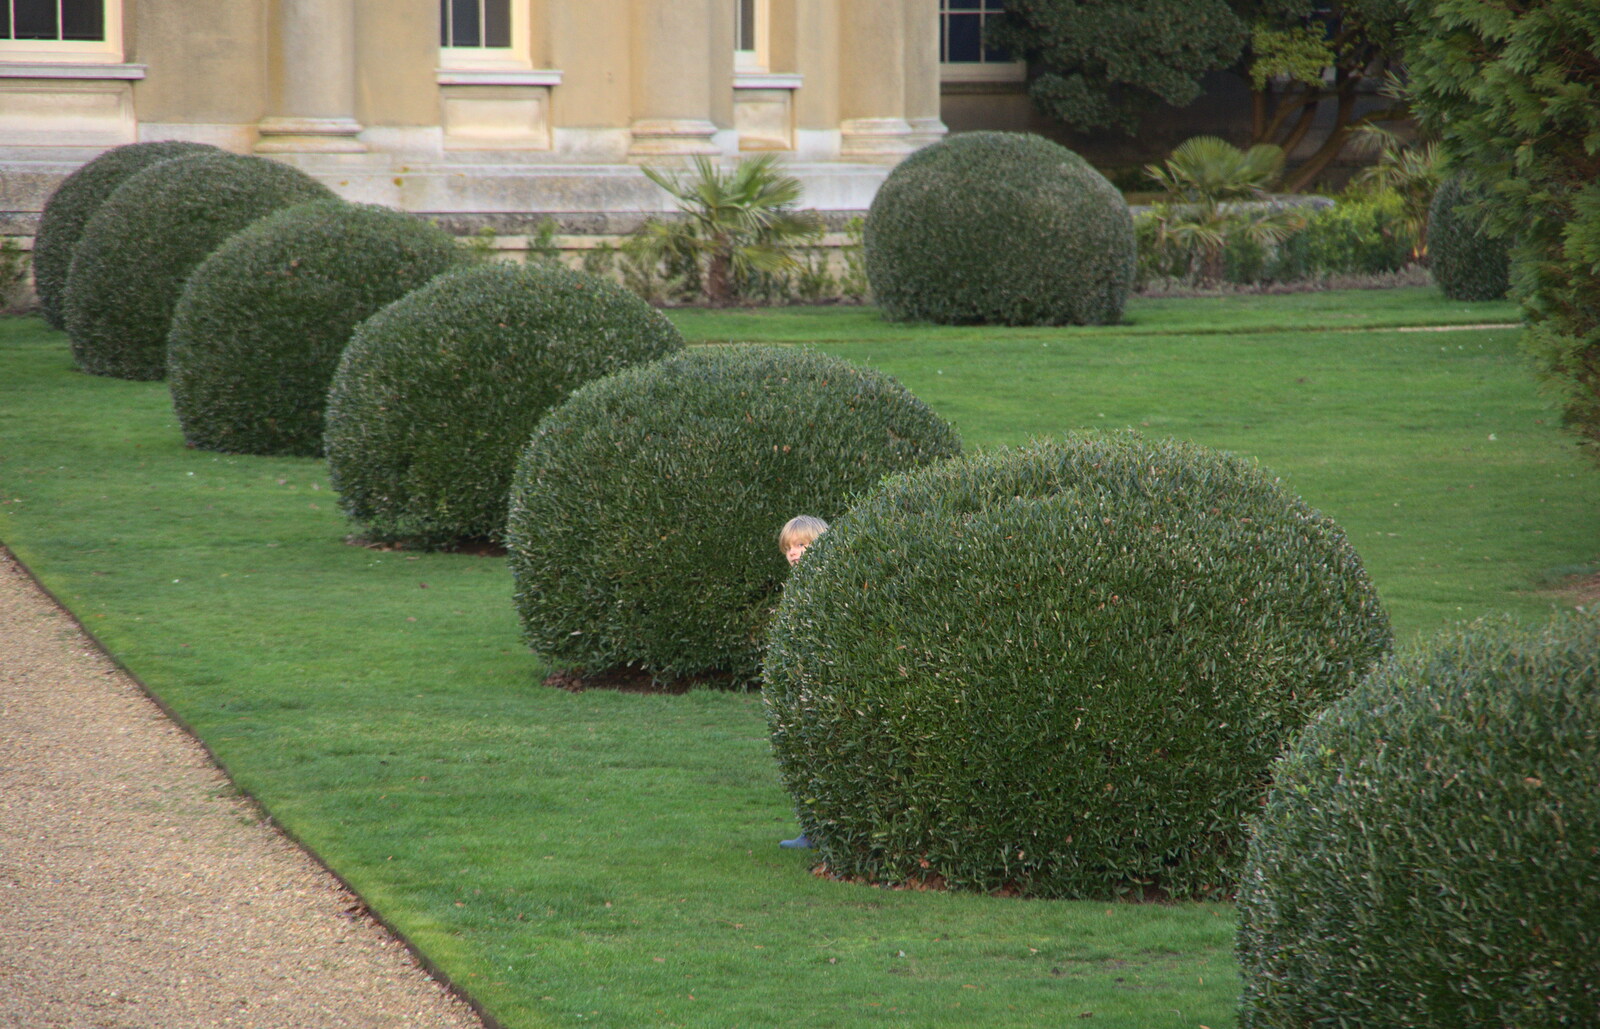 Harry tries to do some hiding from Ickworth House, Horringer, Suffolk - 29th December 2018